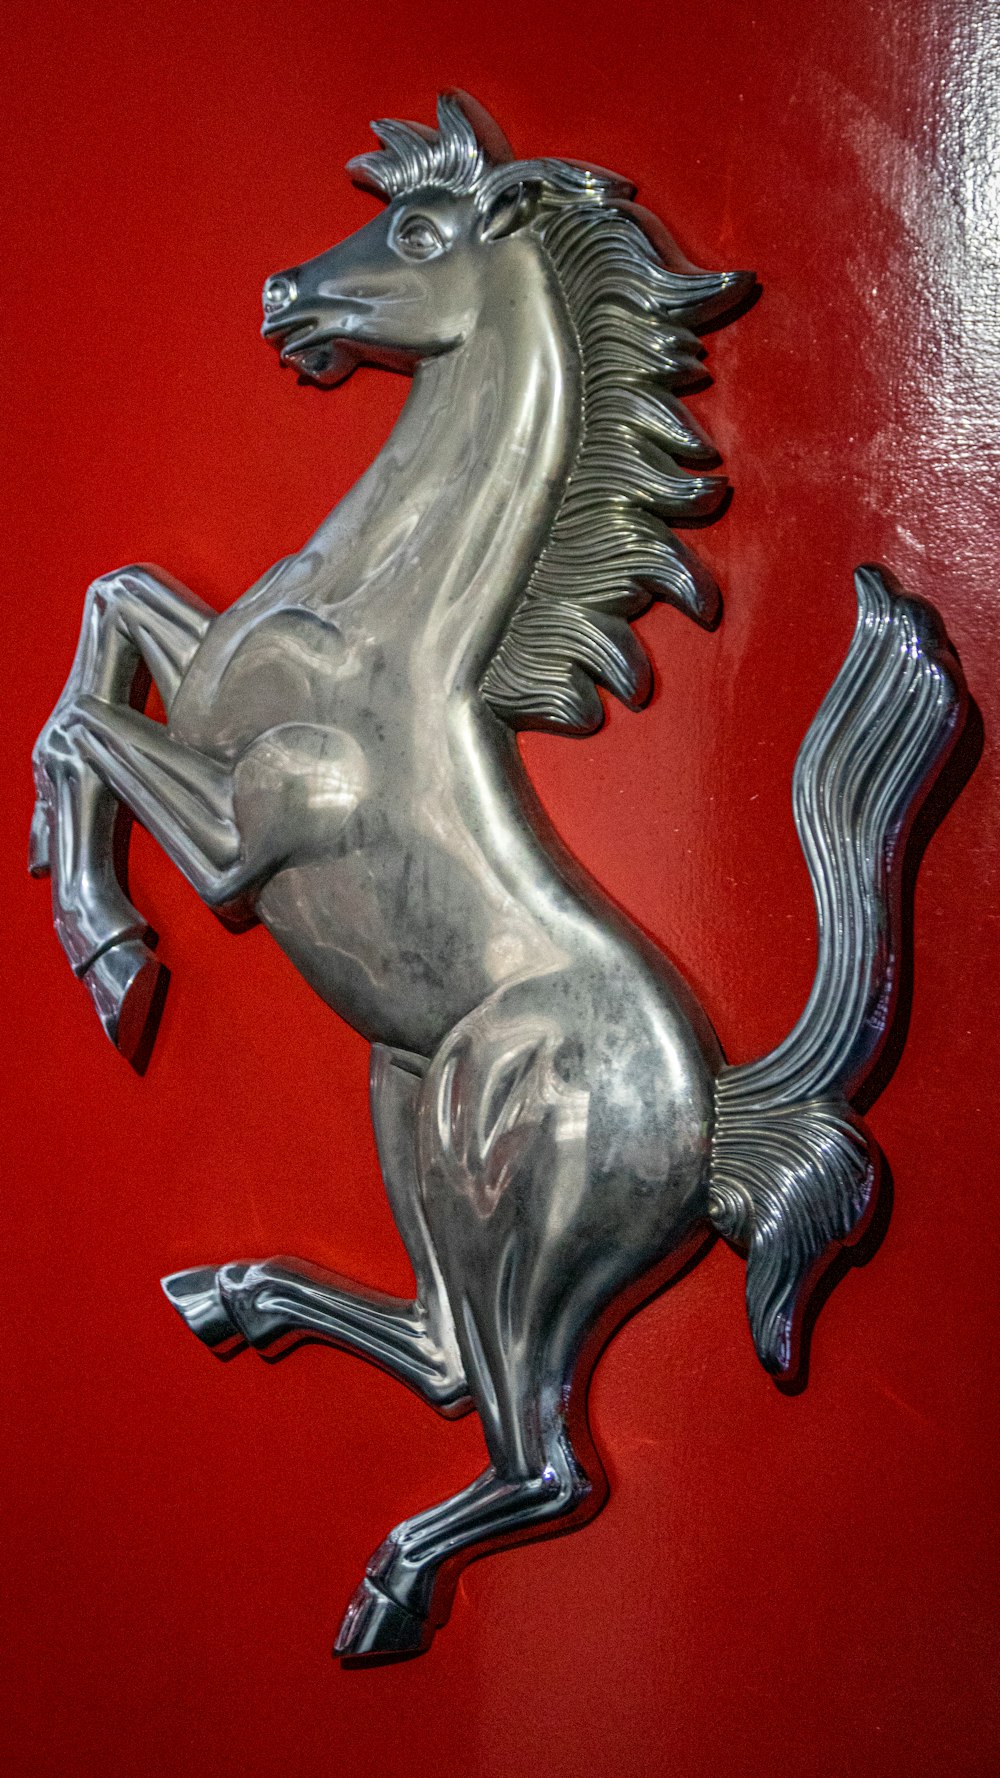 a silver horse emblem on a red wall